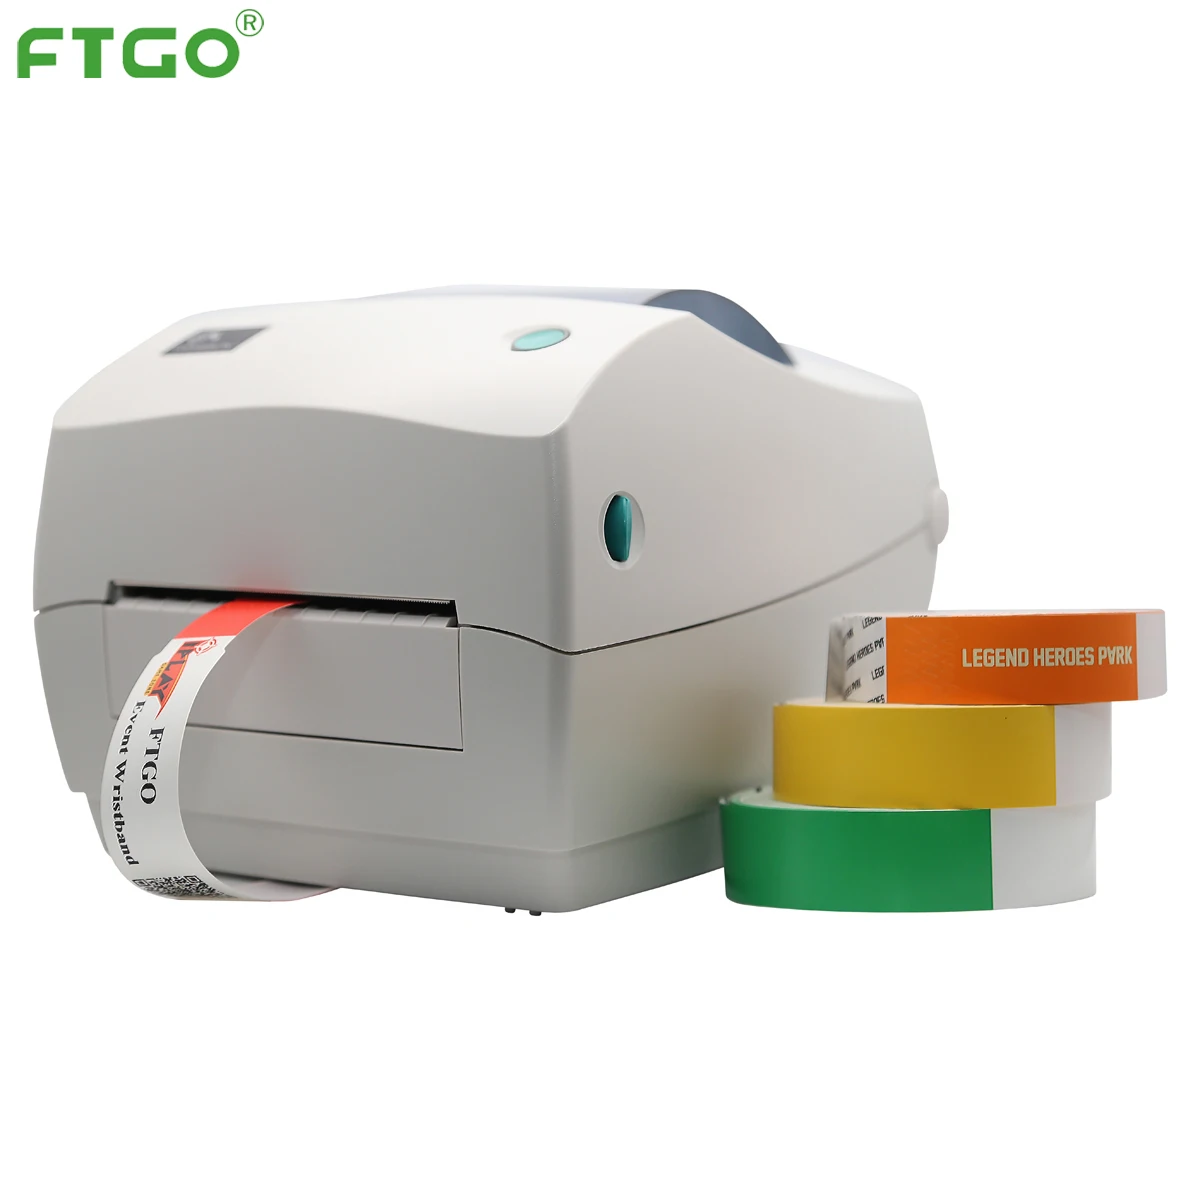 

FTGO Zebra GK888 barcode label printer for direct thermal id wristbands, Black and white